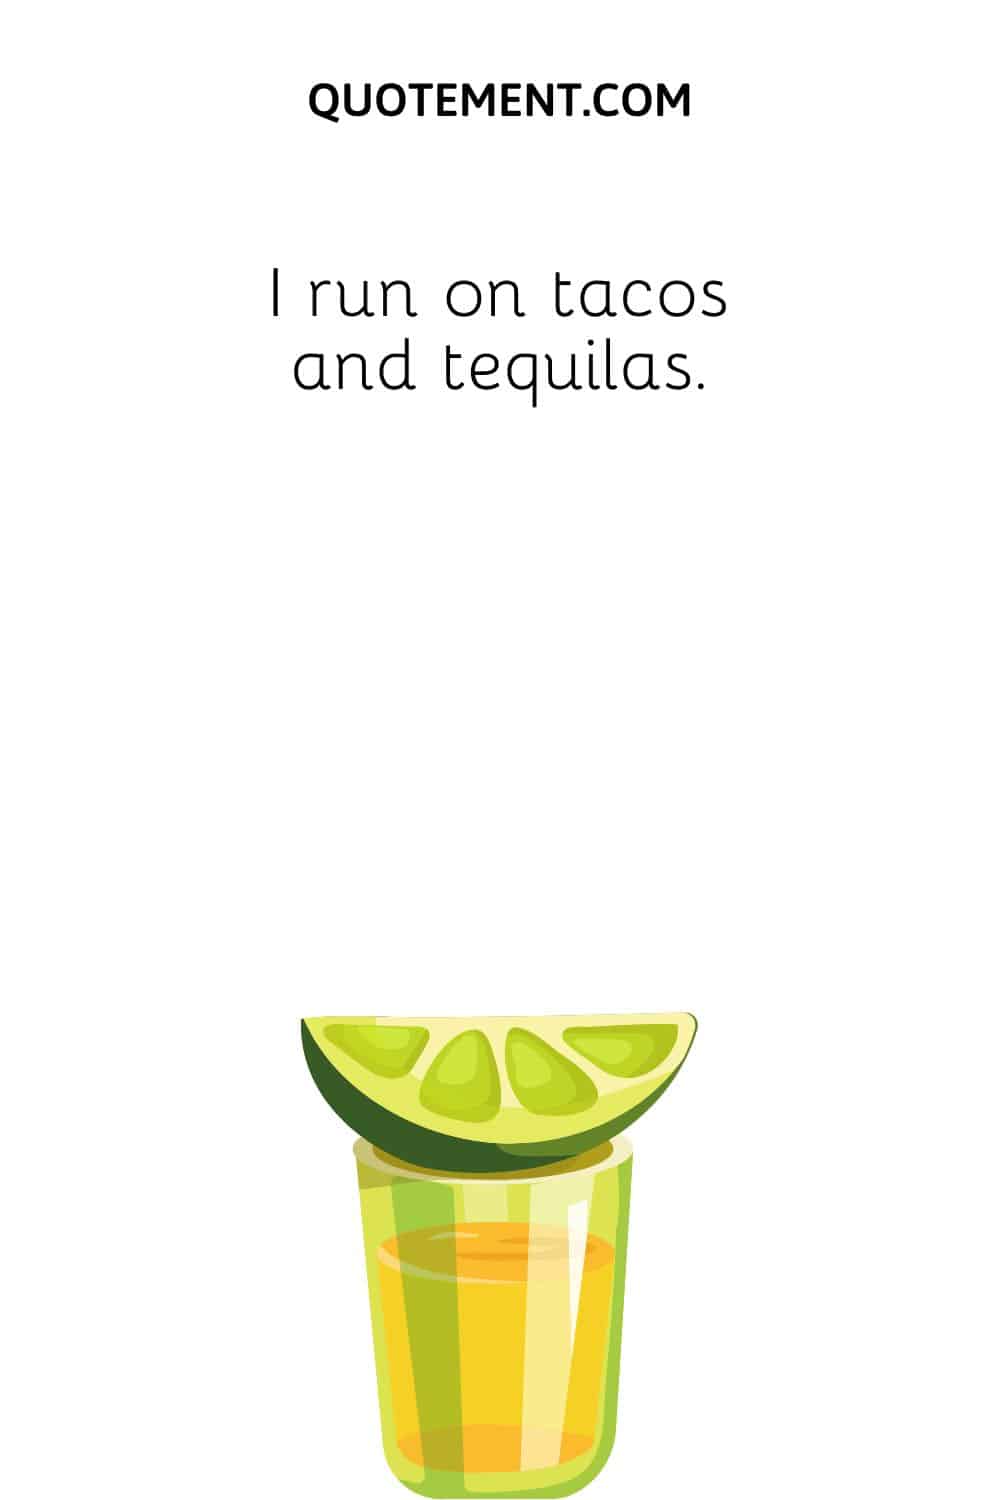 I run on tacos and tequilas.